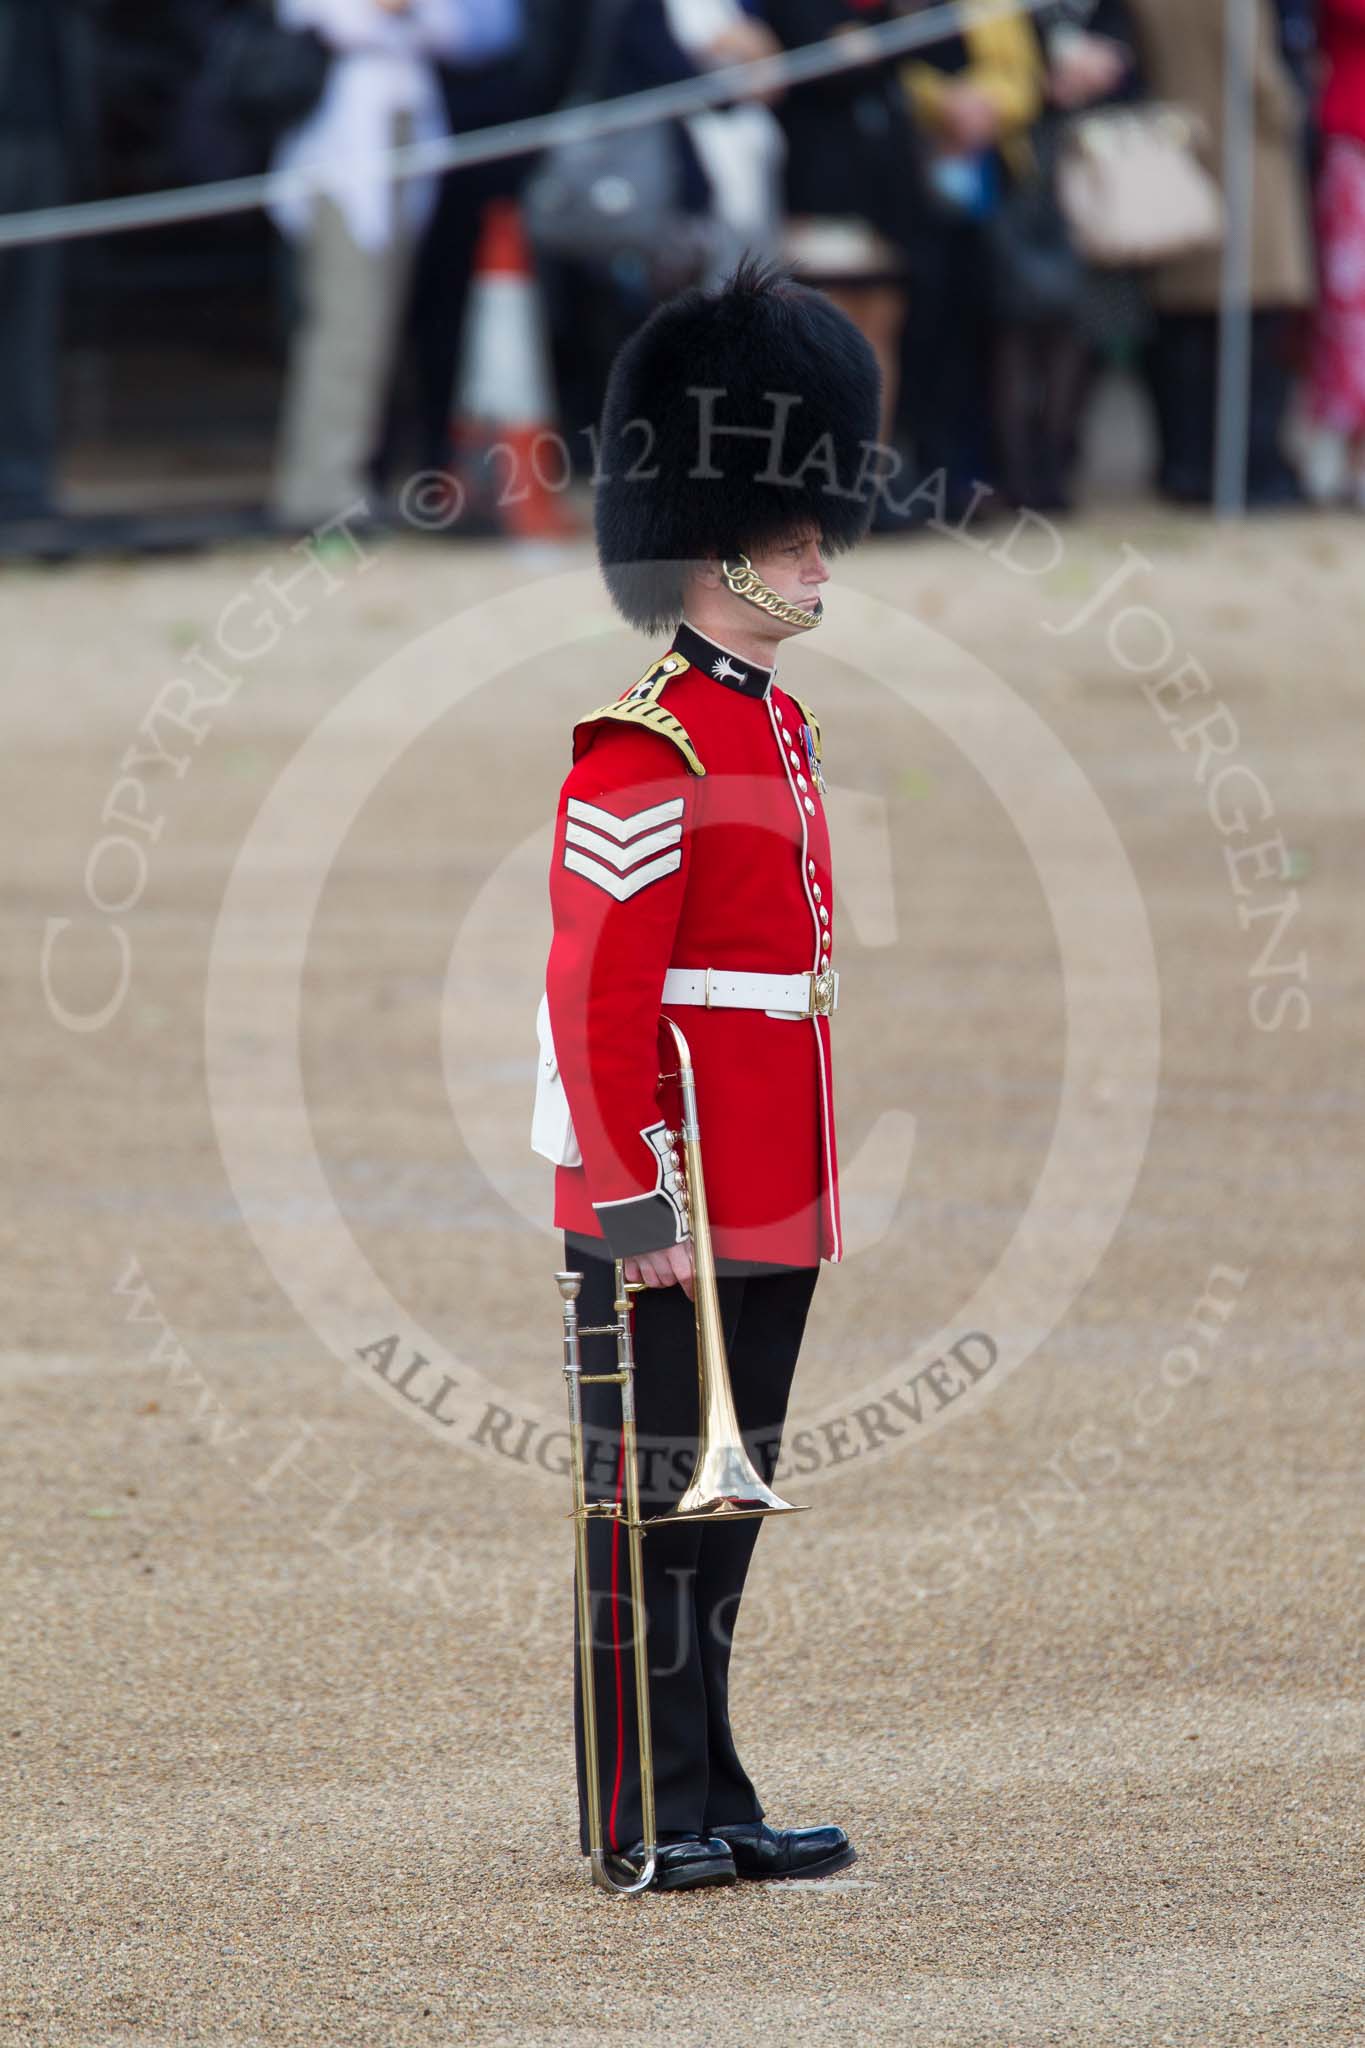 Trooping the Colour 2012: A Lance Sergeant of the Welsh Guards, marking the position for the Band of the Welsh Guards on Horse Guards Parade..
Horse Guards Parade, Westminster,
London SW1,

United Kingdom,
on 16 June 2012 at 10:14, image #24